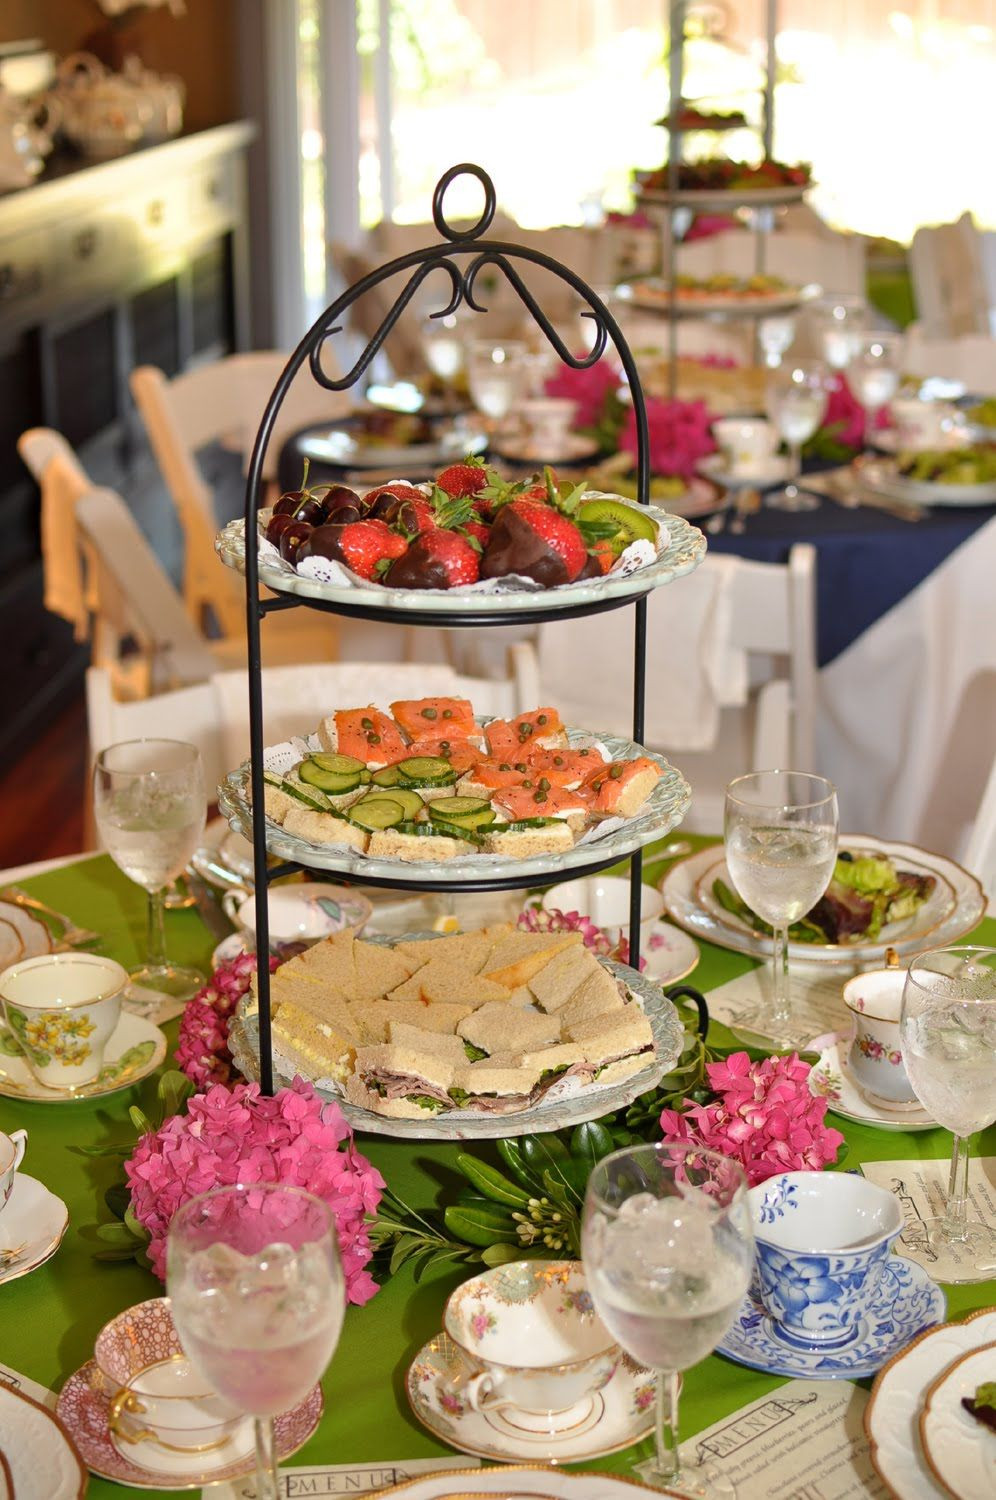 Food Ideas For Tea Party Bridal Shower
 Lisa is Bossy This is how we do it wedding